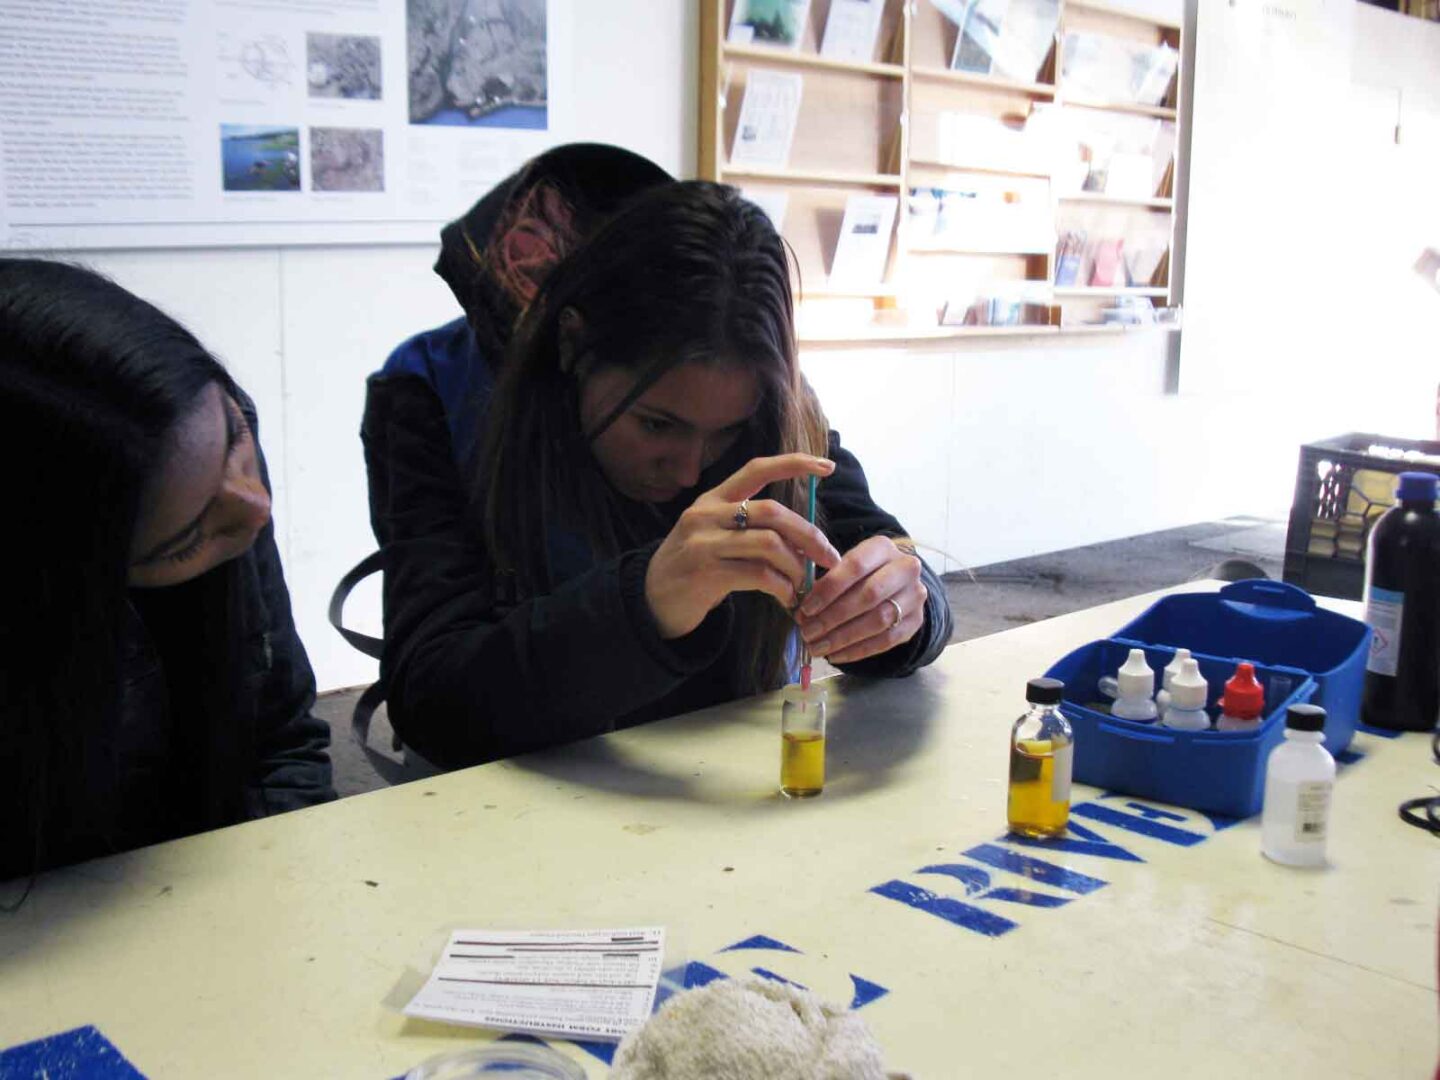 Students learn about water quality and drop in solution to test their theories